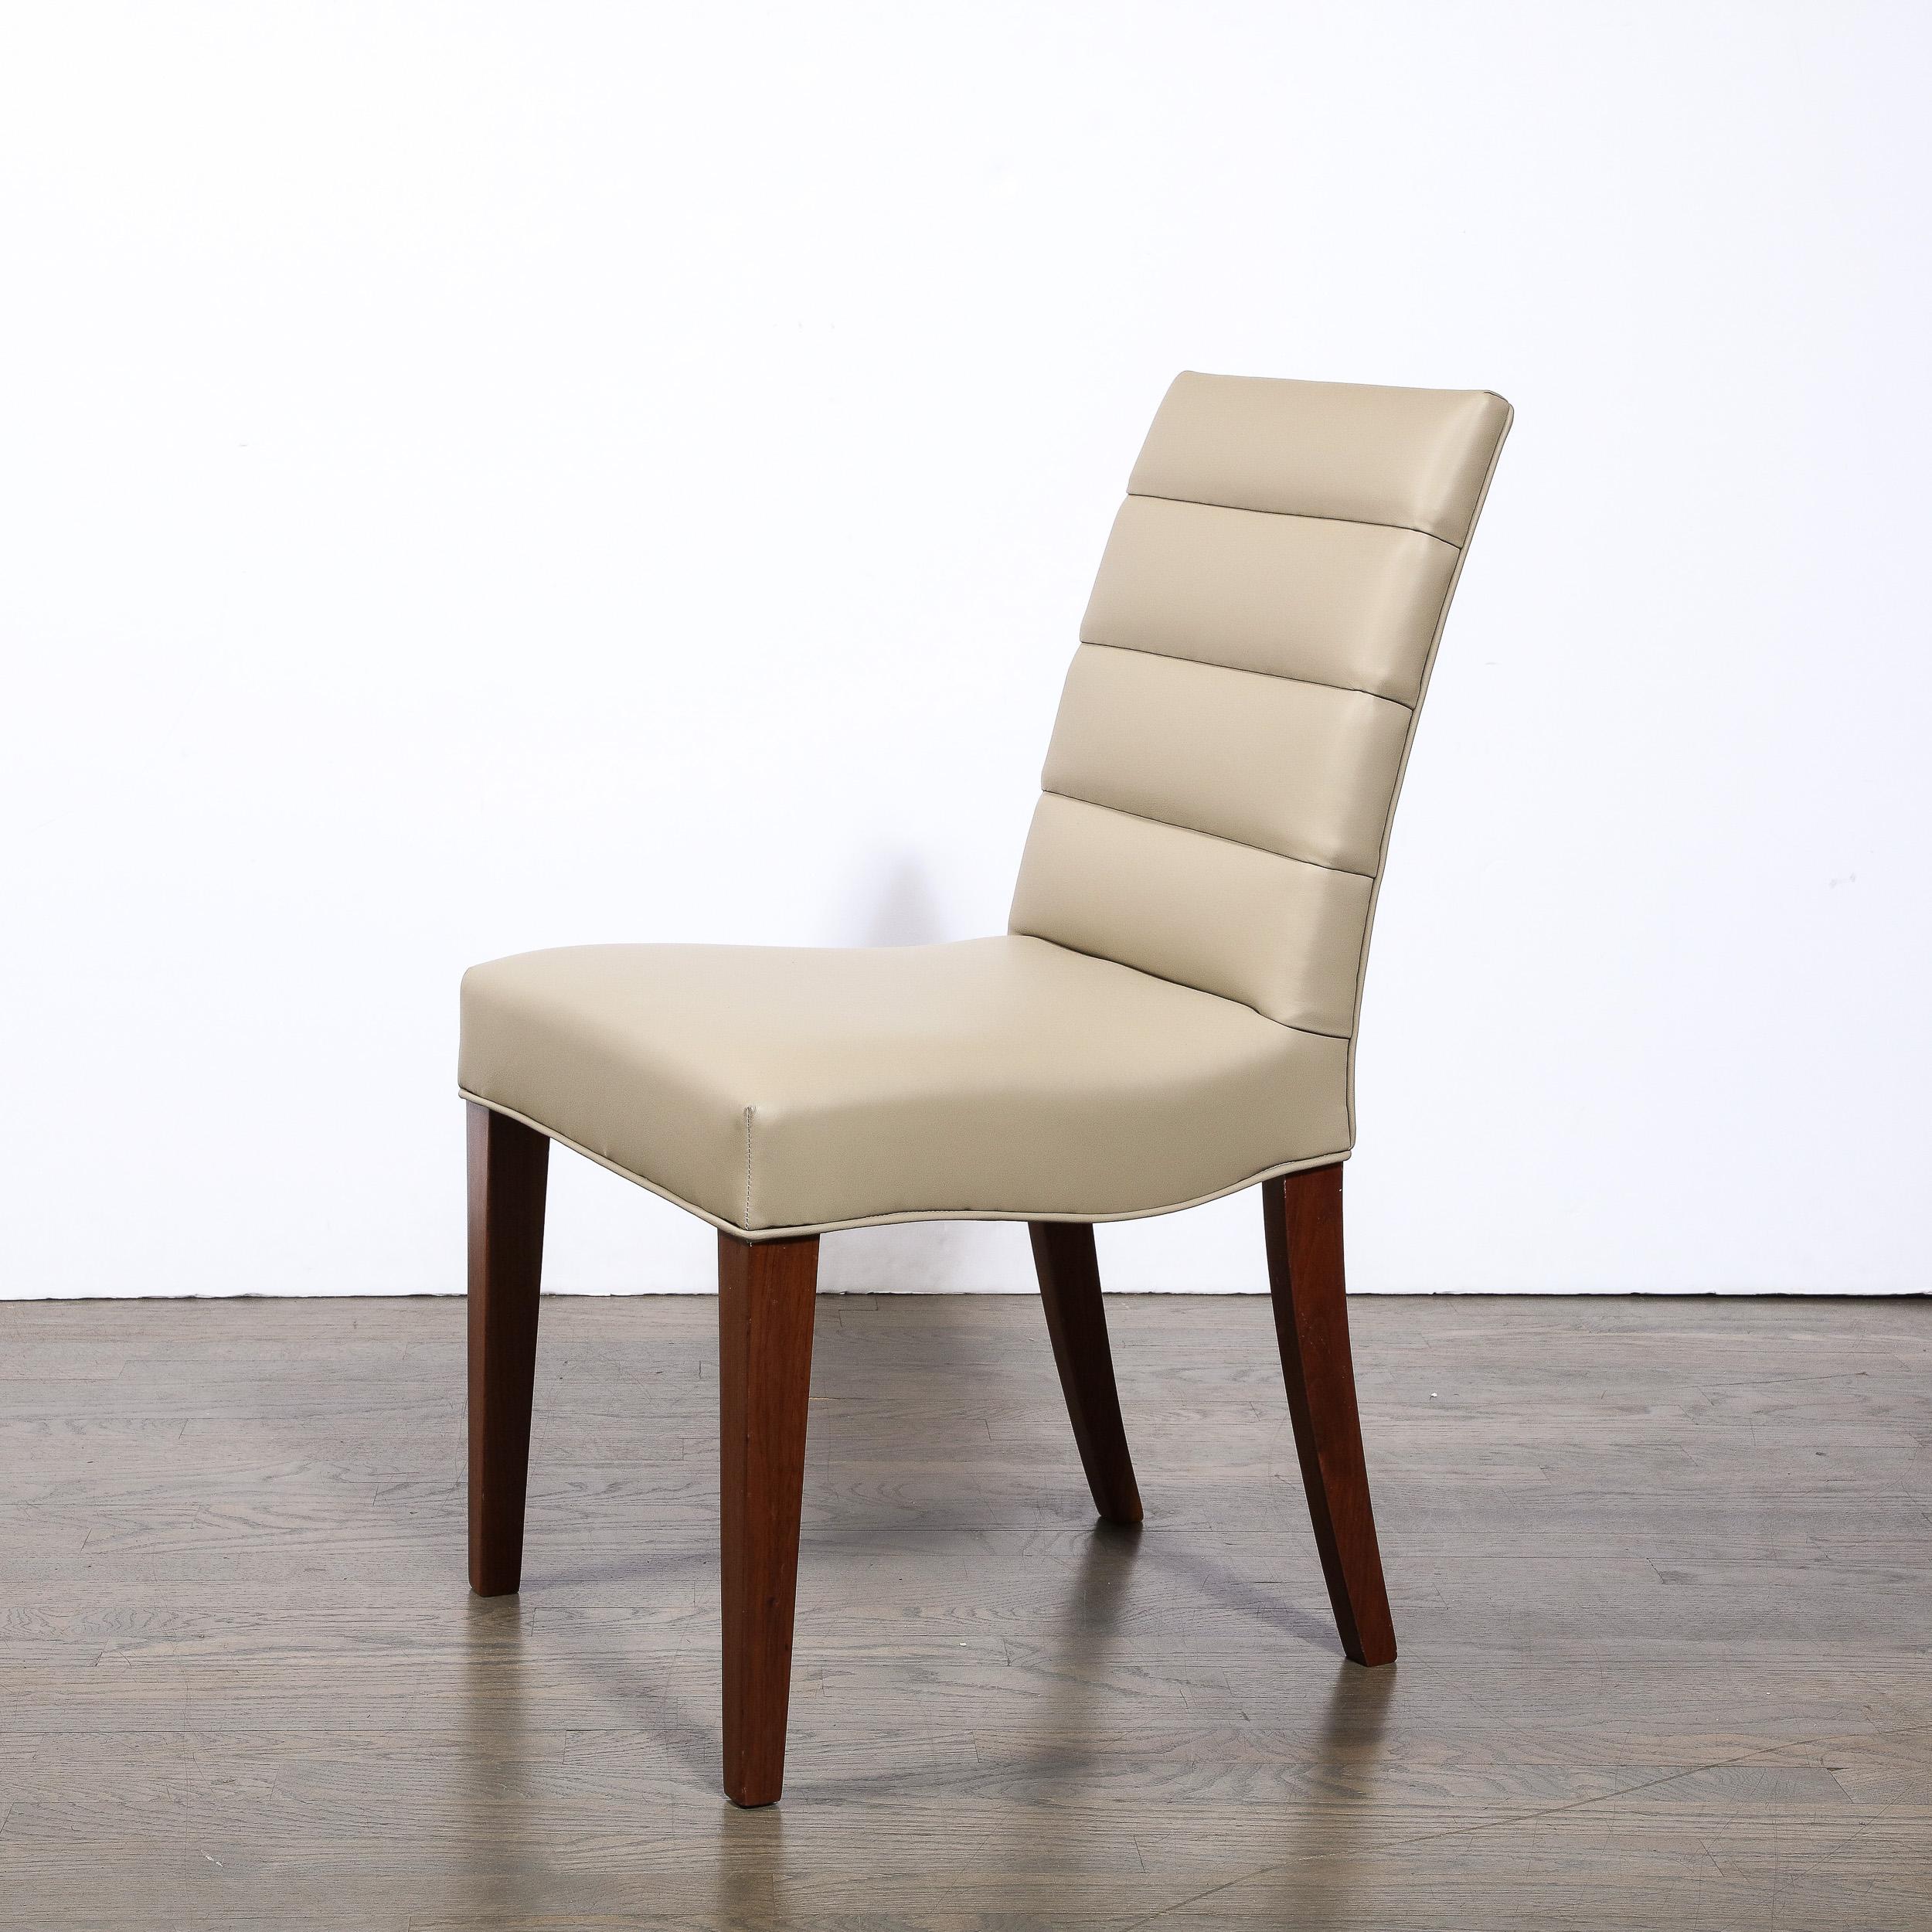 Mid-20th Century Art Deco Gilbert Rohde Chair in Holly Hunt Leather w/ Tufted Back & Walnut Legs For Sale